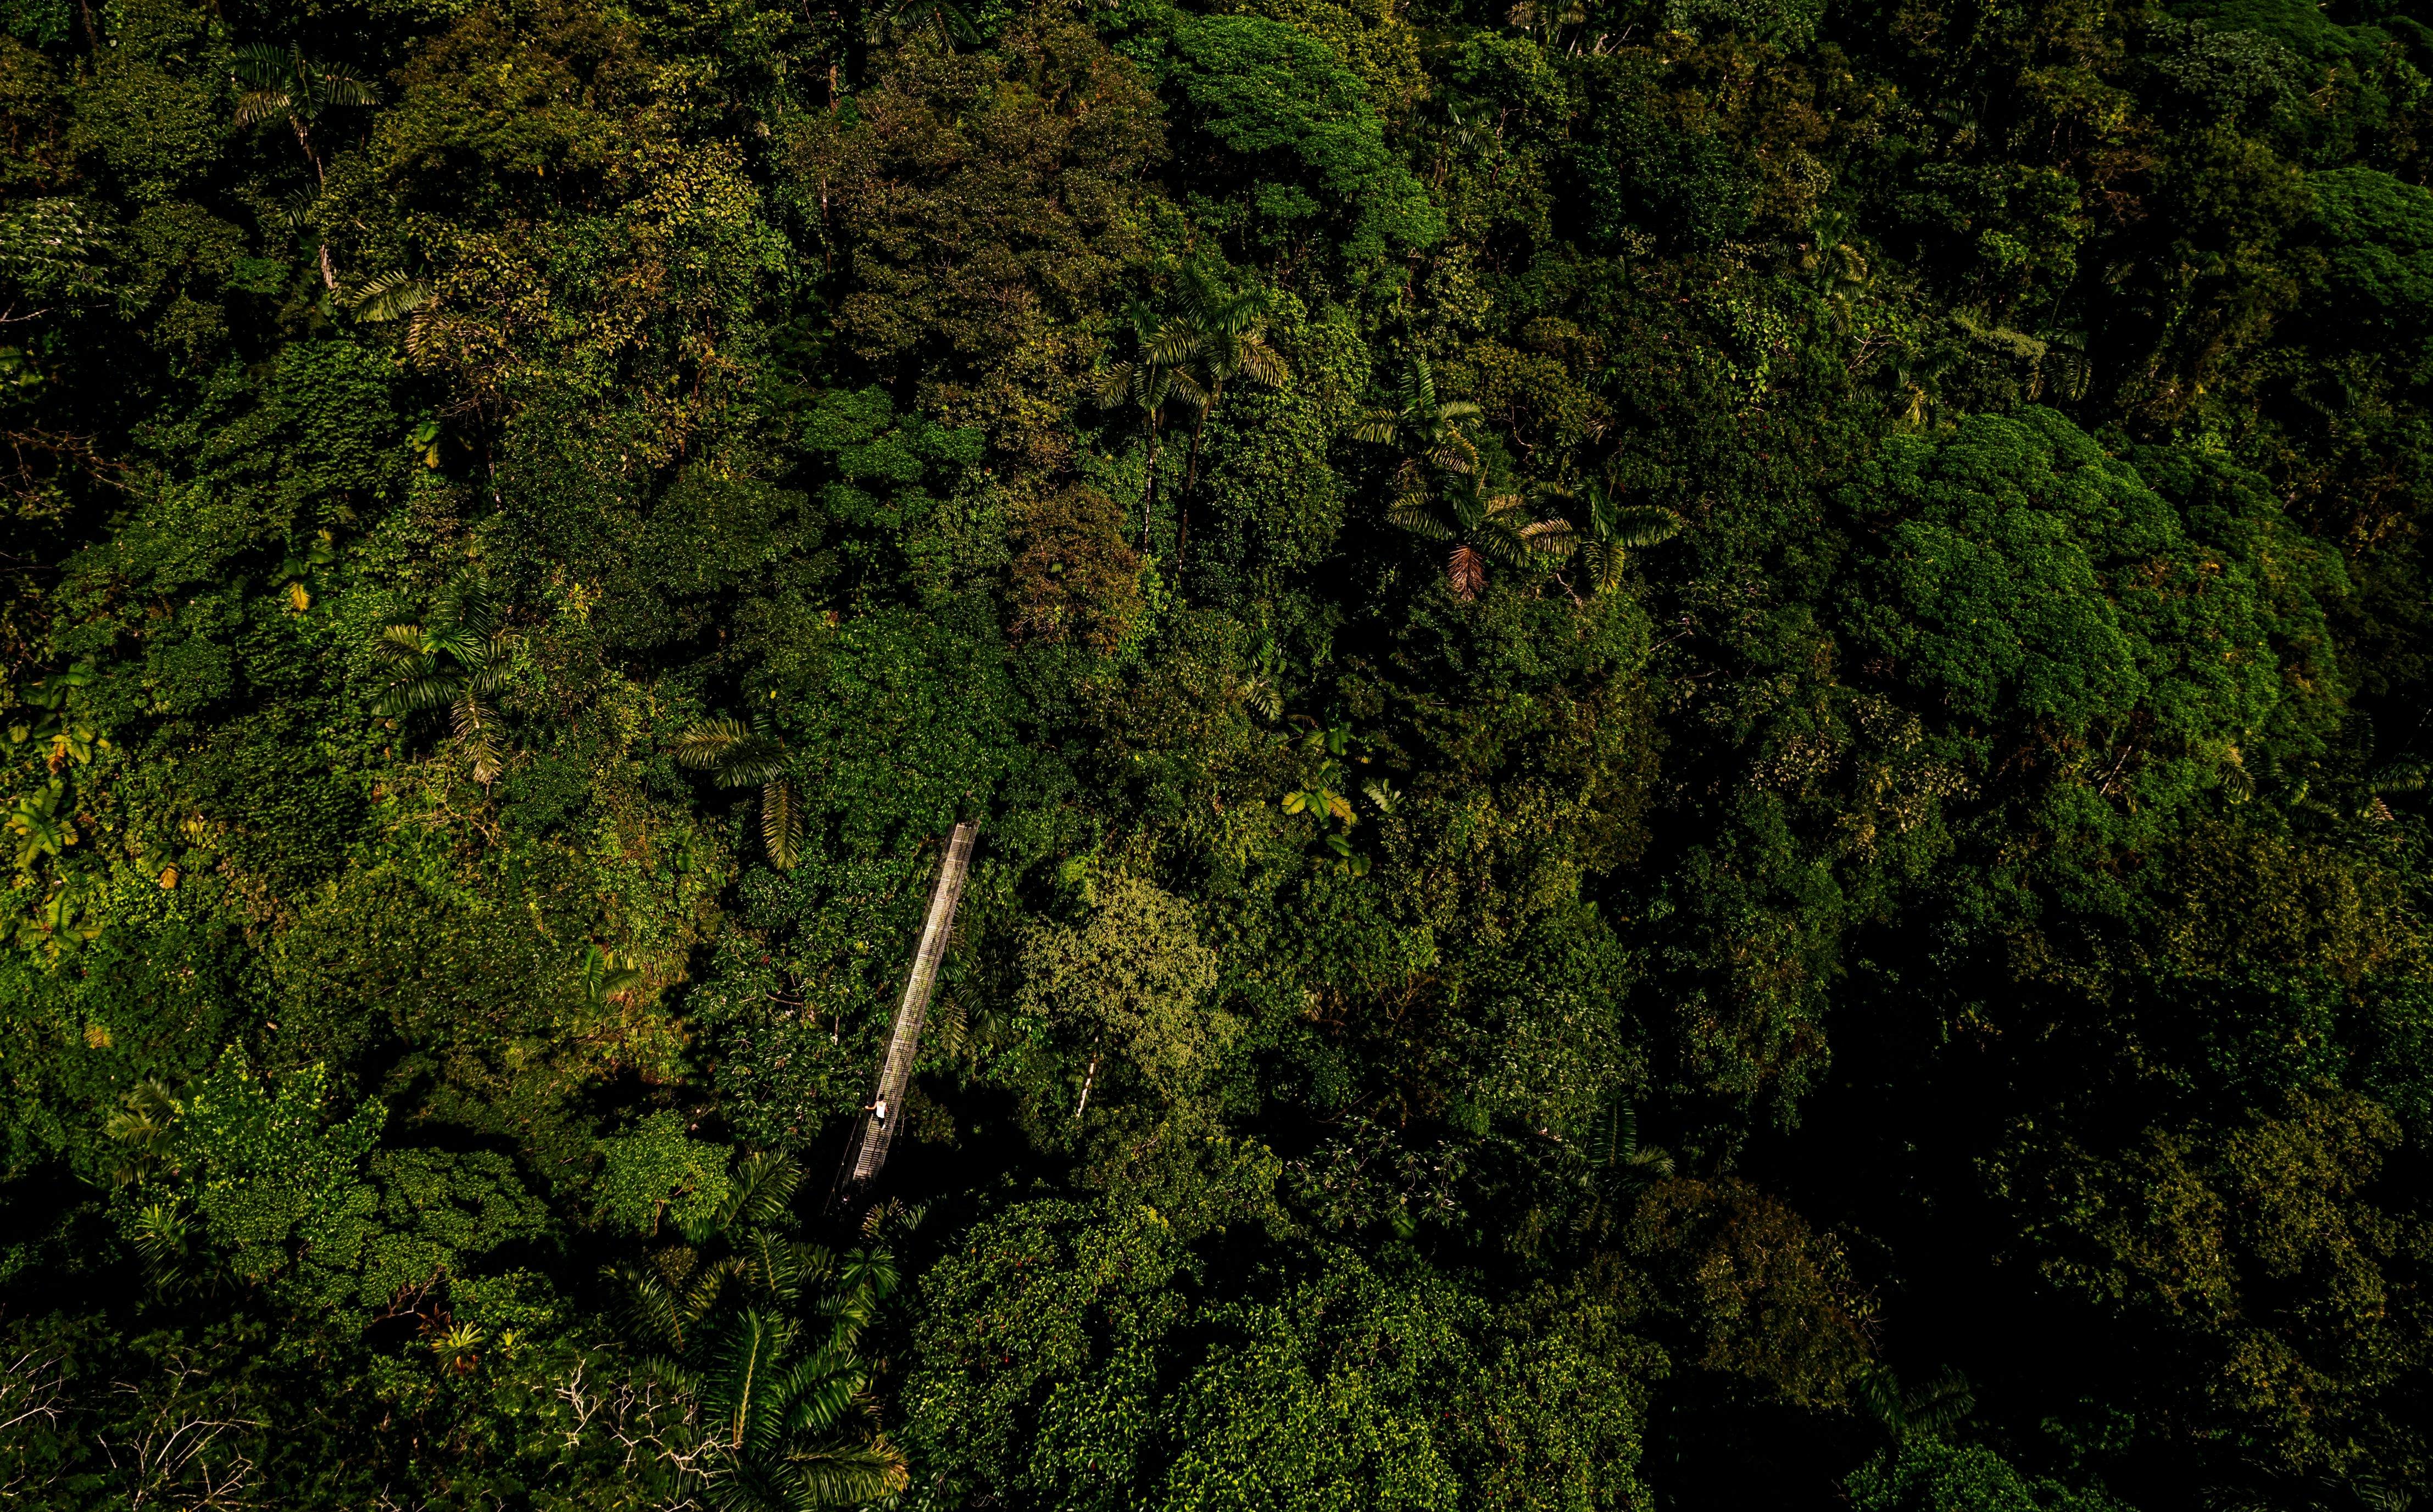 Rainforest protected by Mistico Park